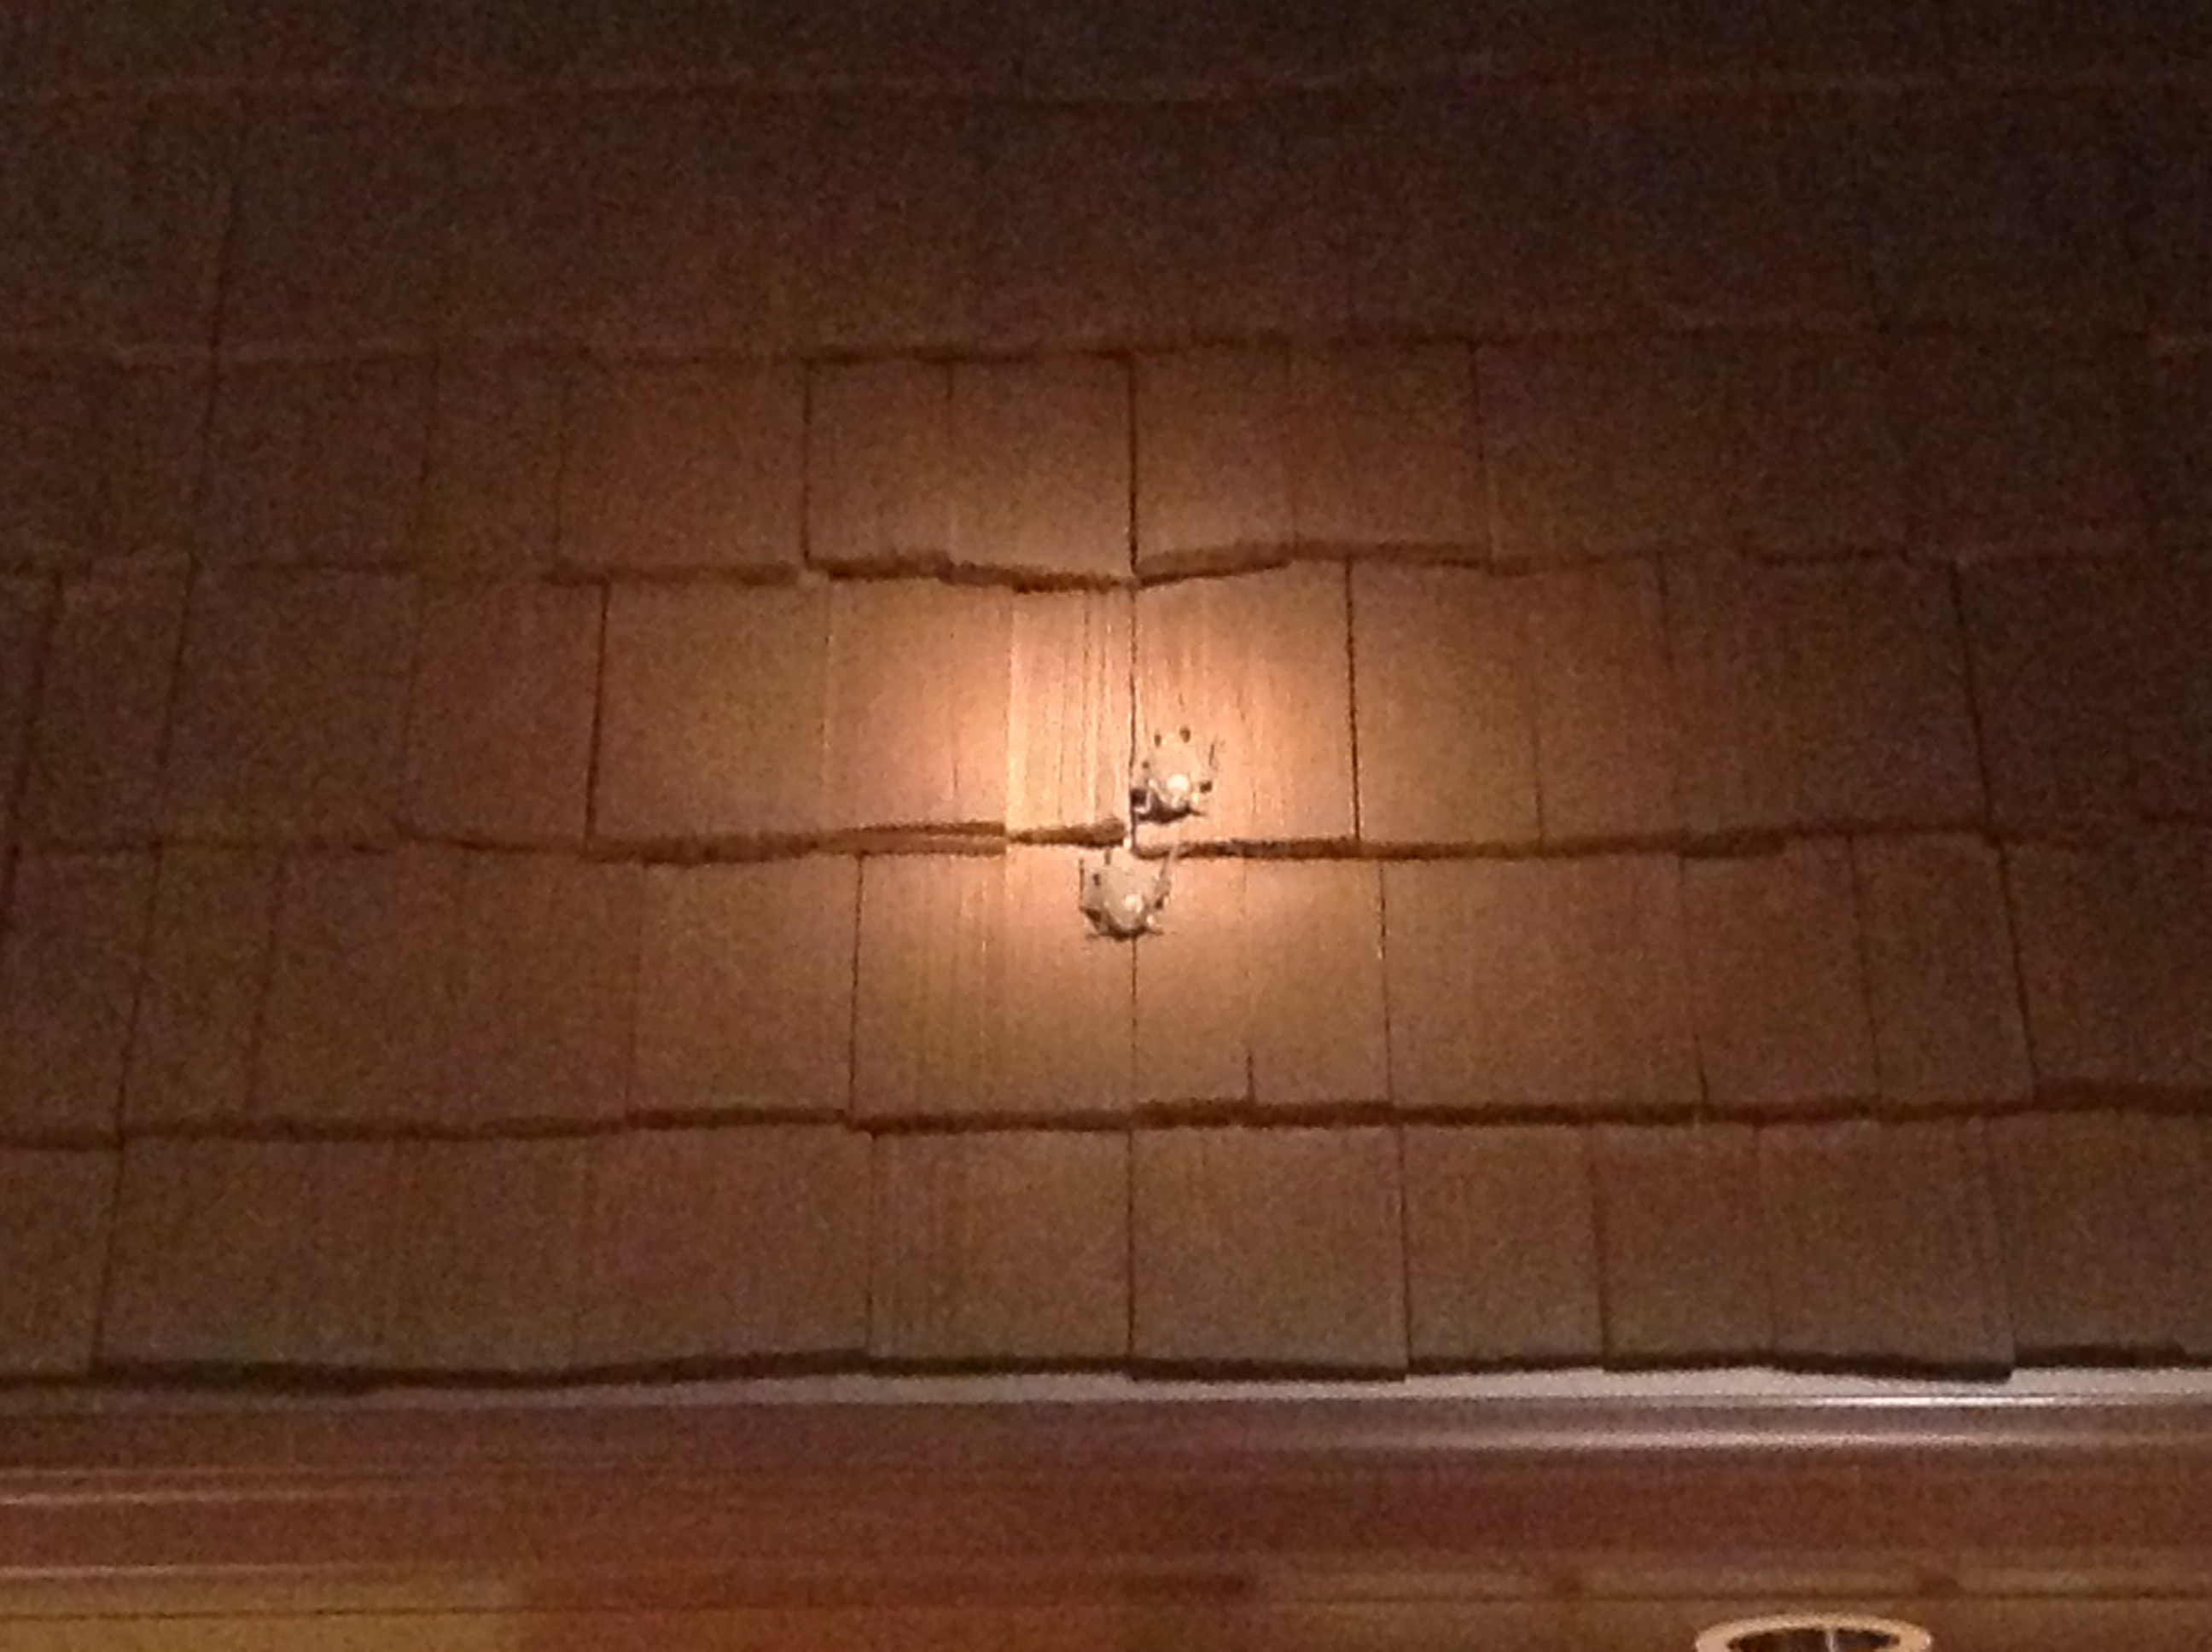 Two model bats roost on the shingles of a model house.